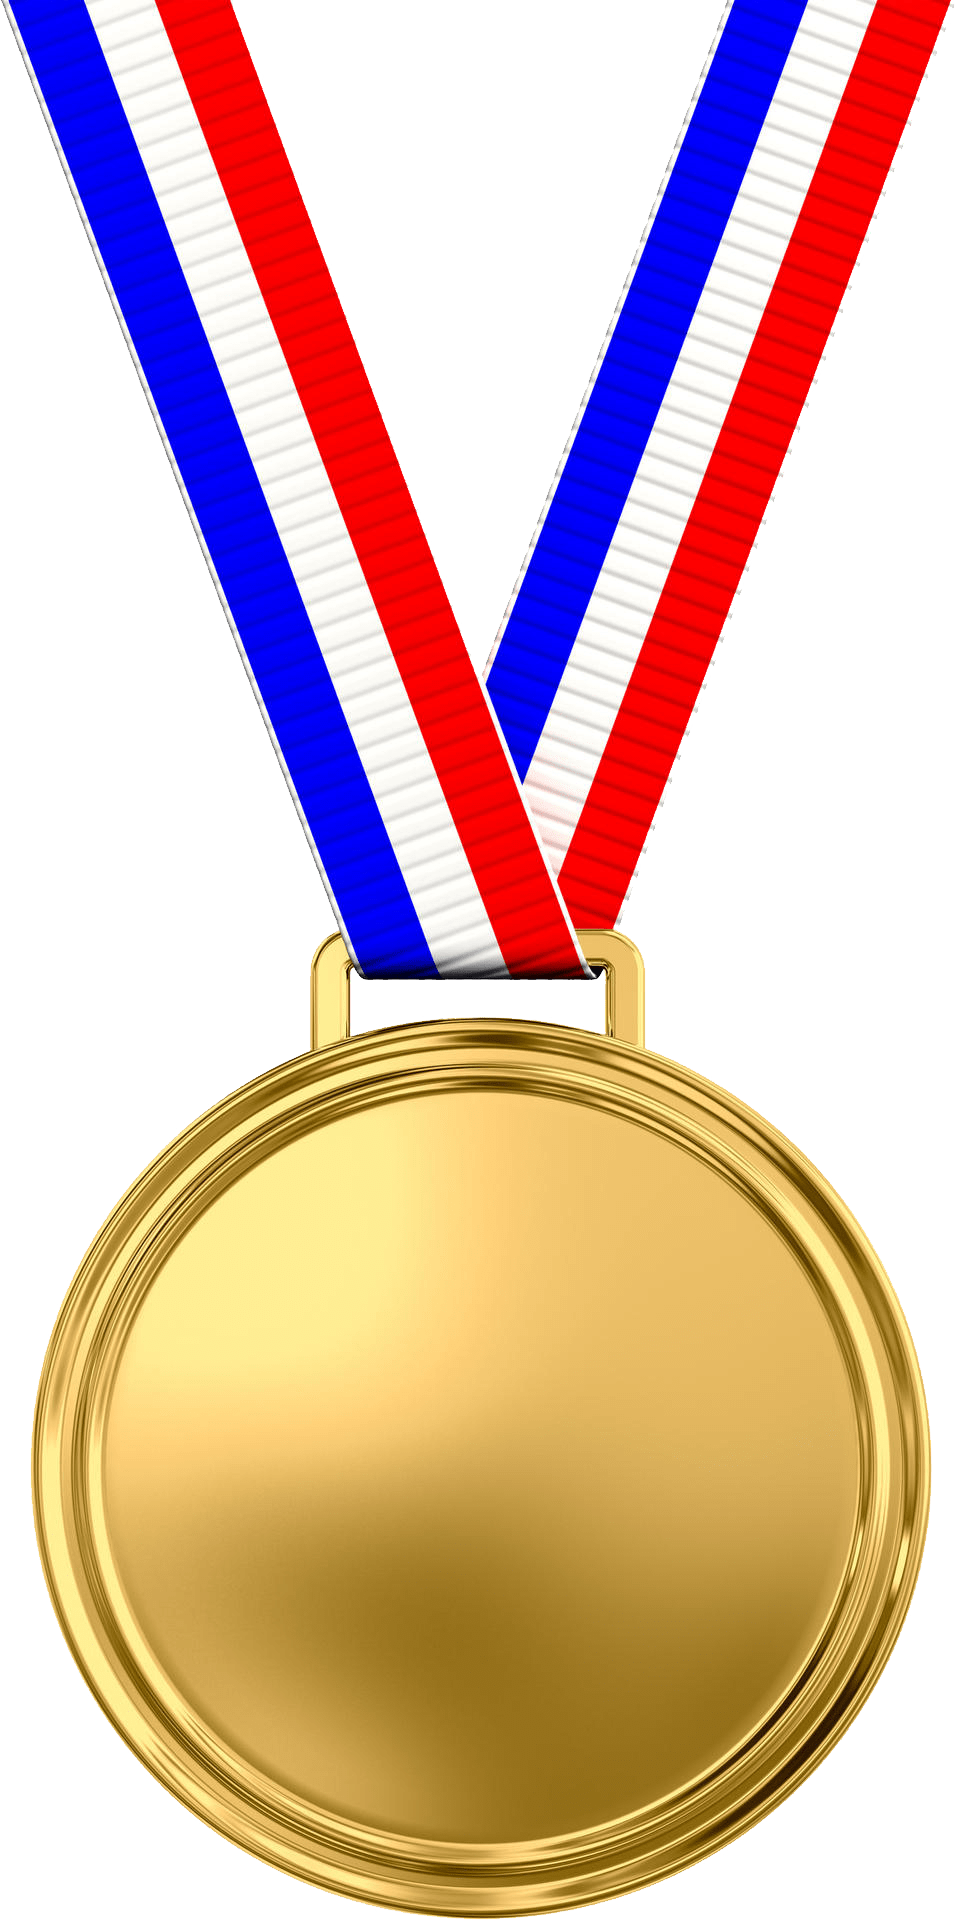 Medal First Place Sky Background Victory Concept Stock Photo by  ©chaiyapruek 409673774